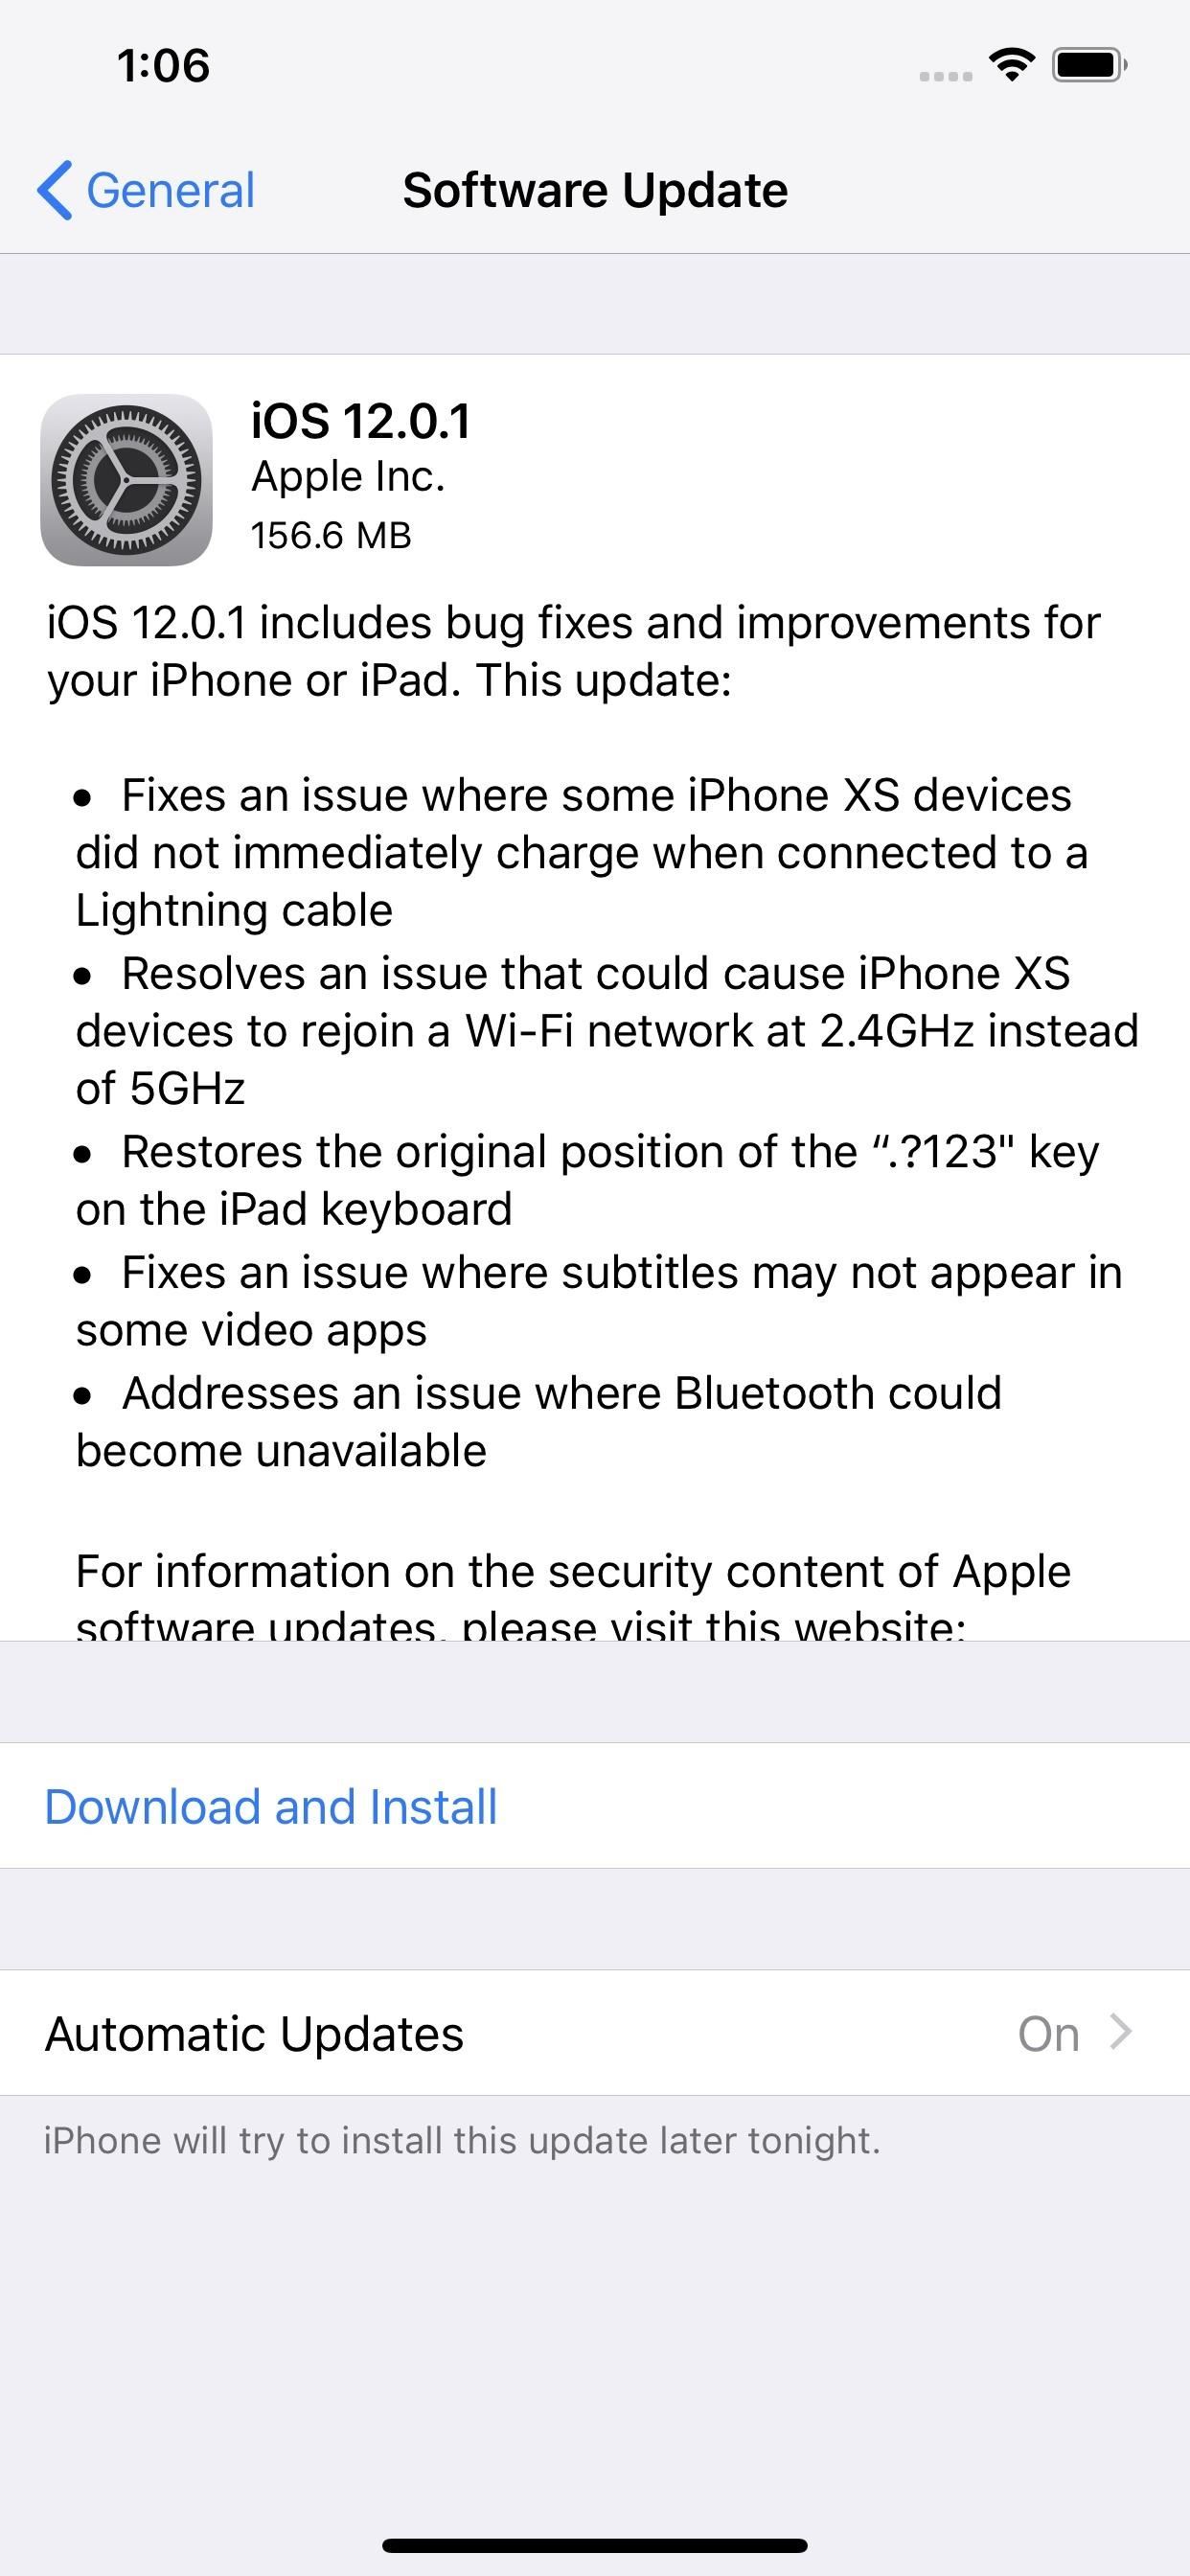 Apple Releases iOS 12.0.1 to Address Wi-Fi & Charging Issues on iPhones